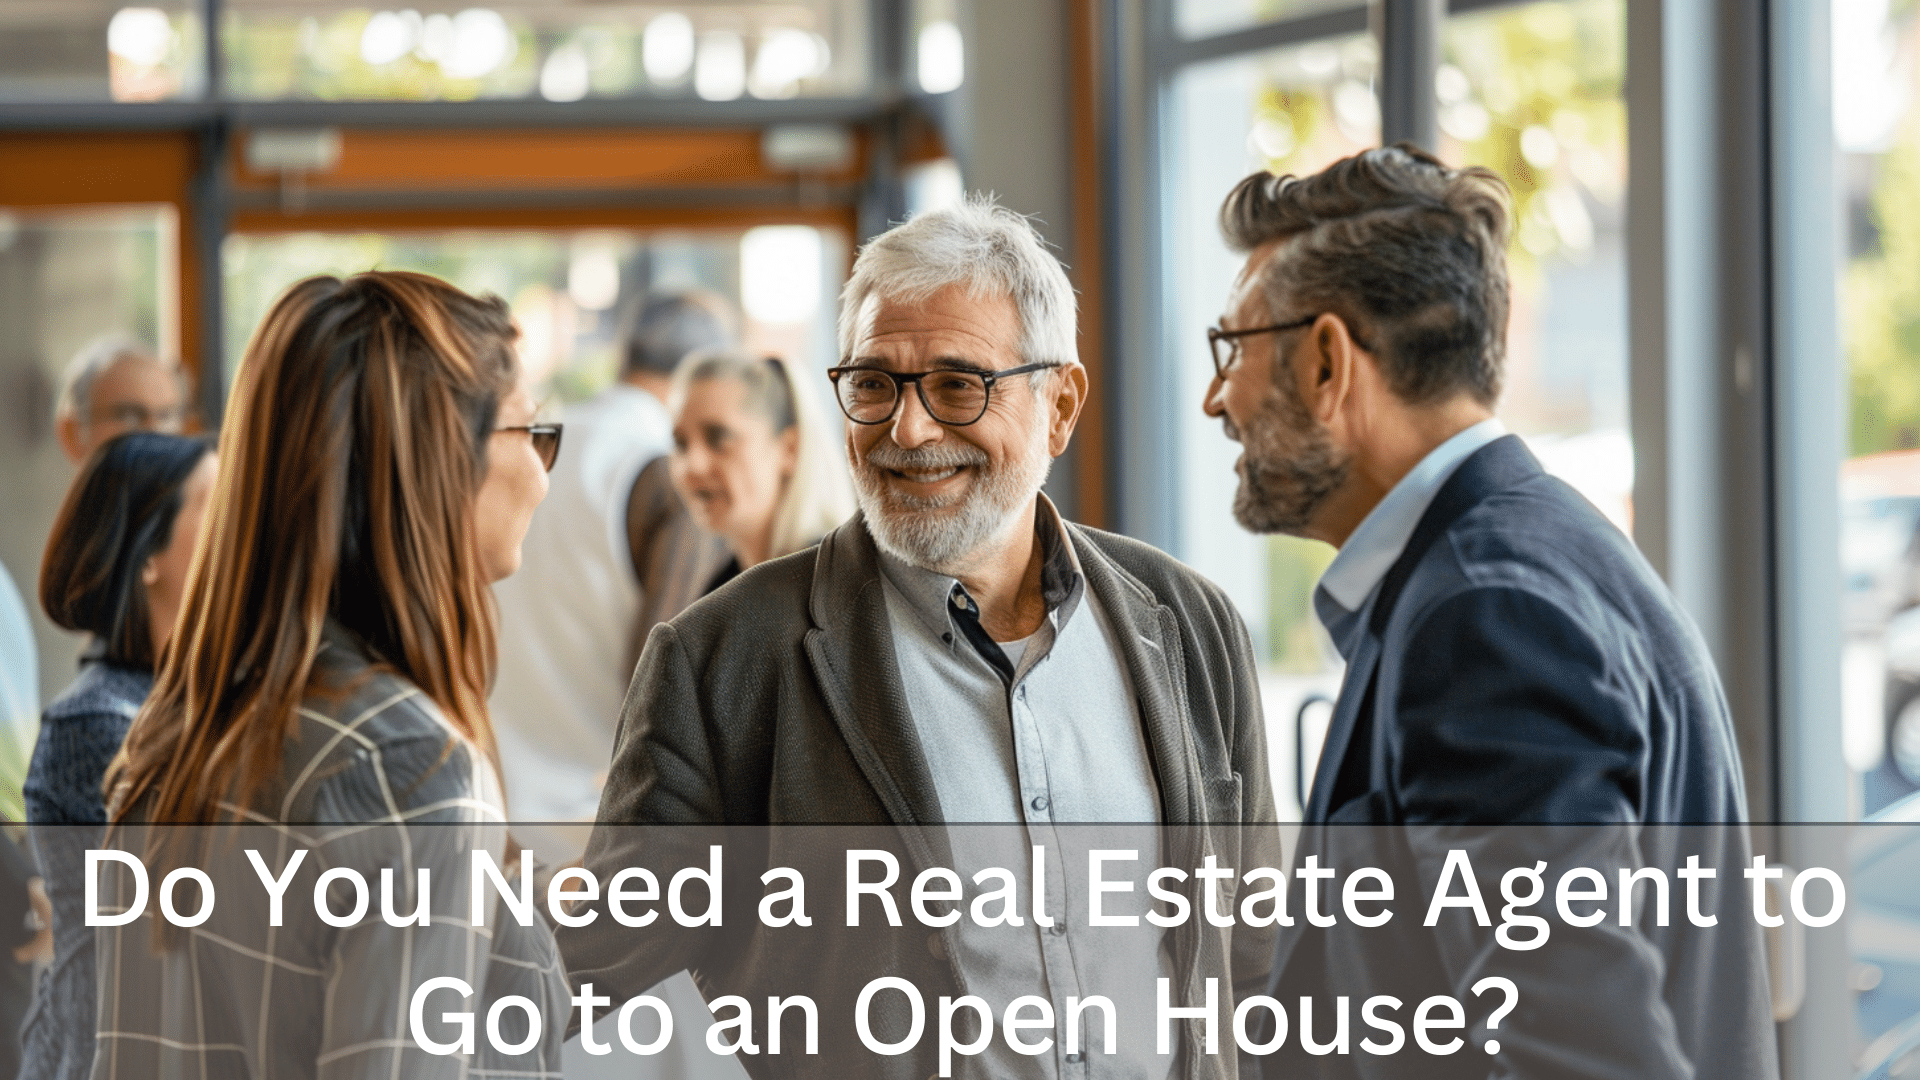 Do you need a real estate agent to go to an open house illustration